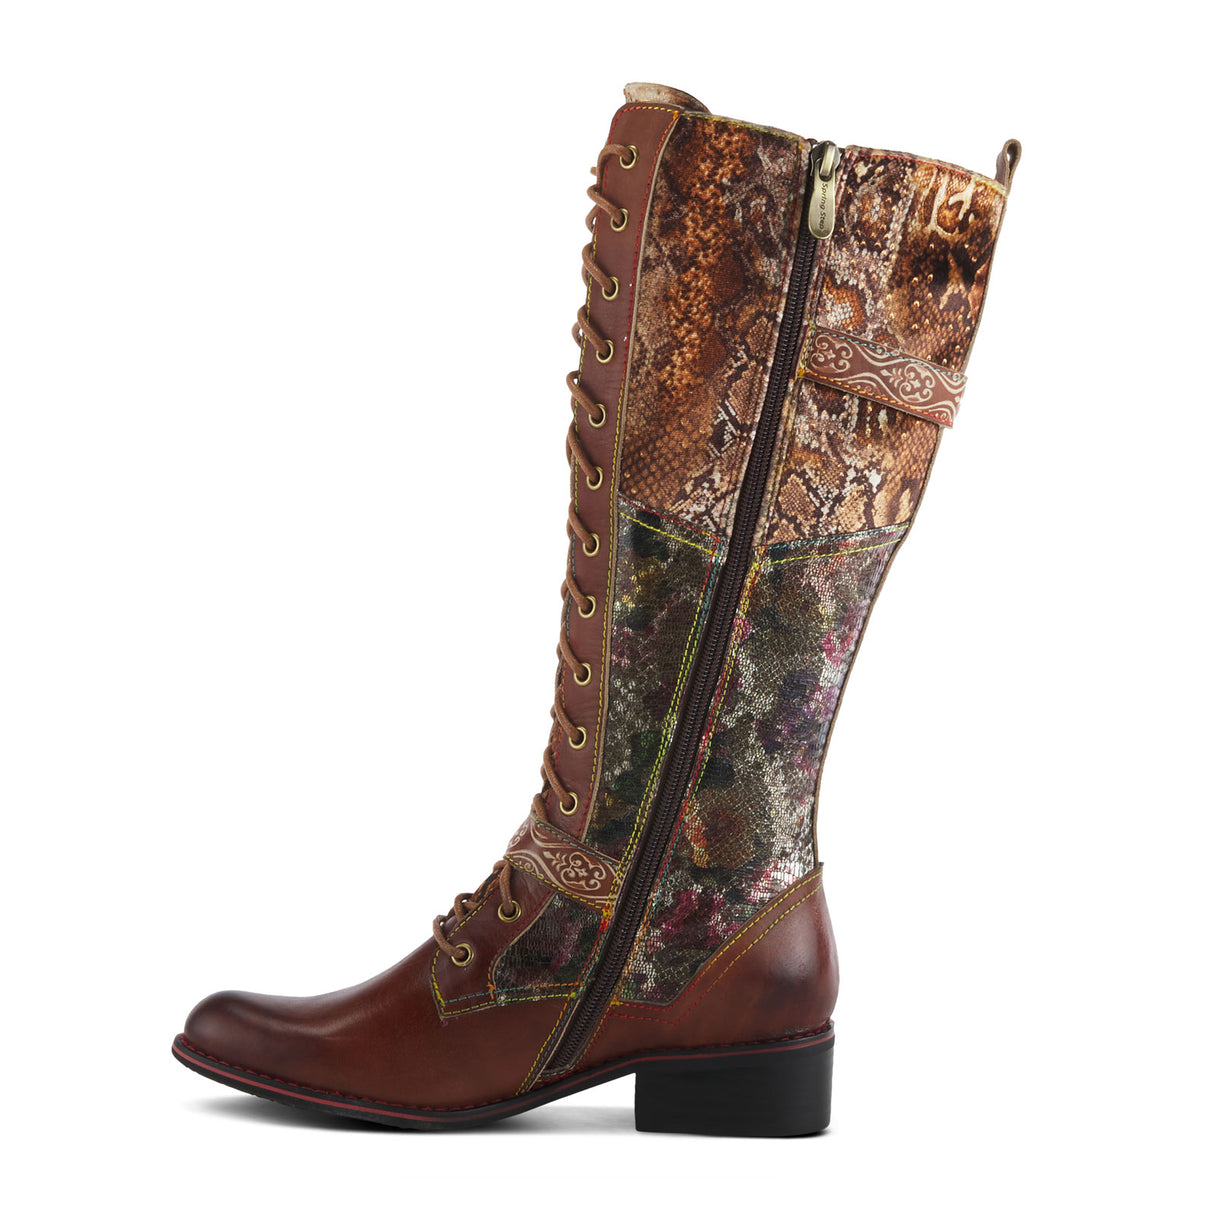 L'Artiste Vaneyck Tall Boot (Women) - Brown Multi Boots - Fashion - High - The Heel Shoe Fitters